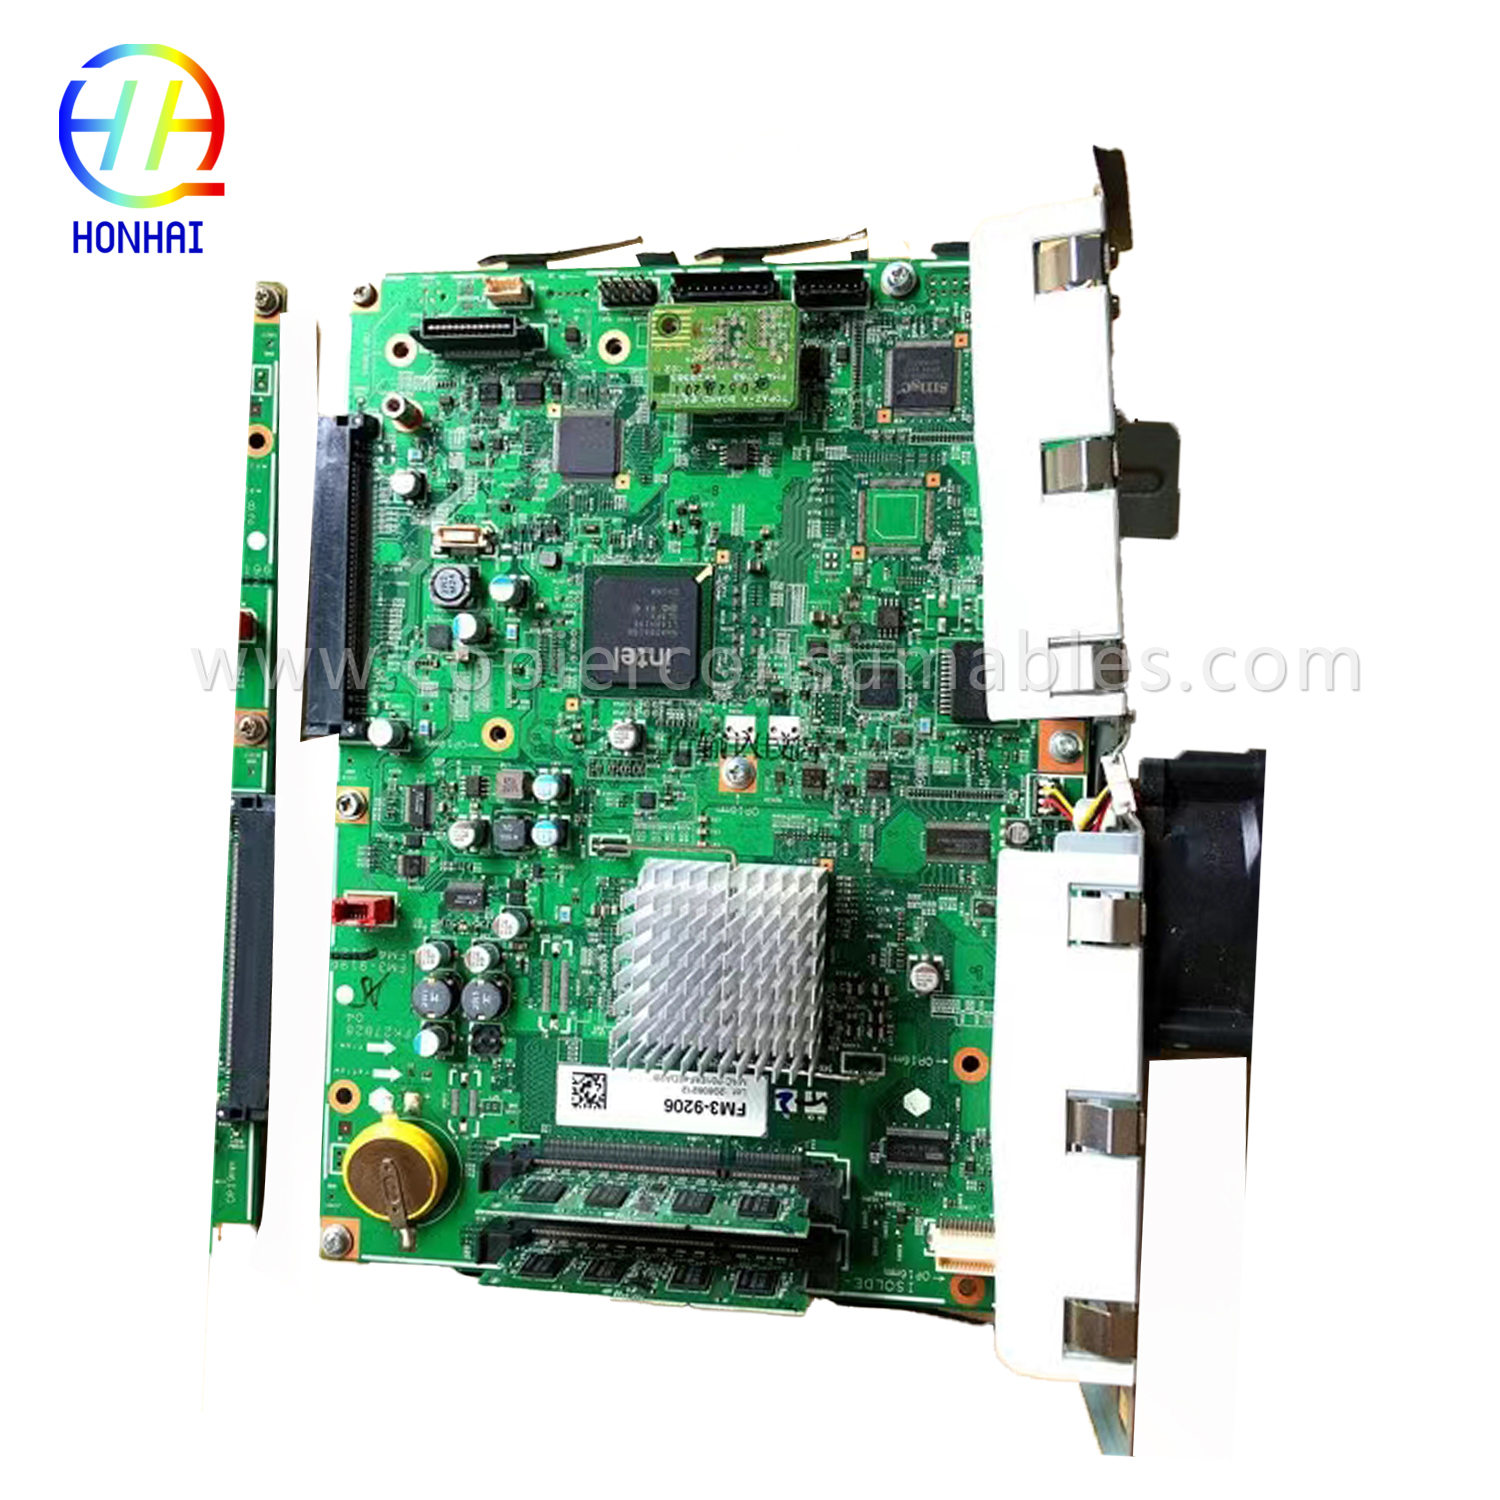 Fomatter Board for Canon IR 8095 (FM3-9206-000)